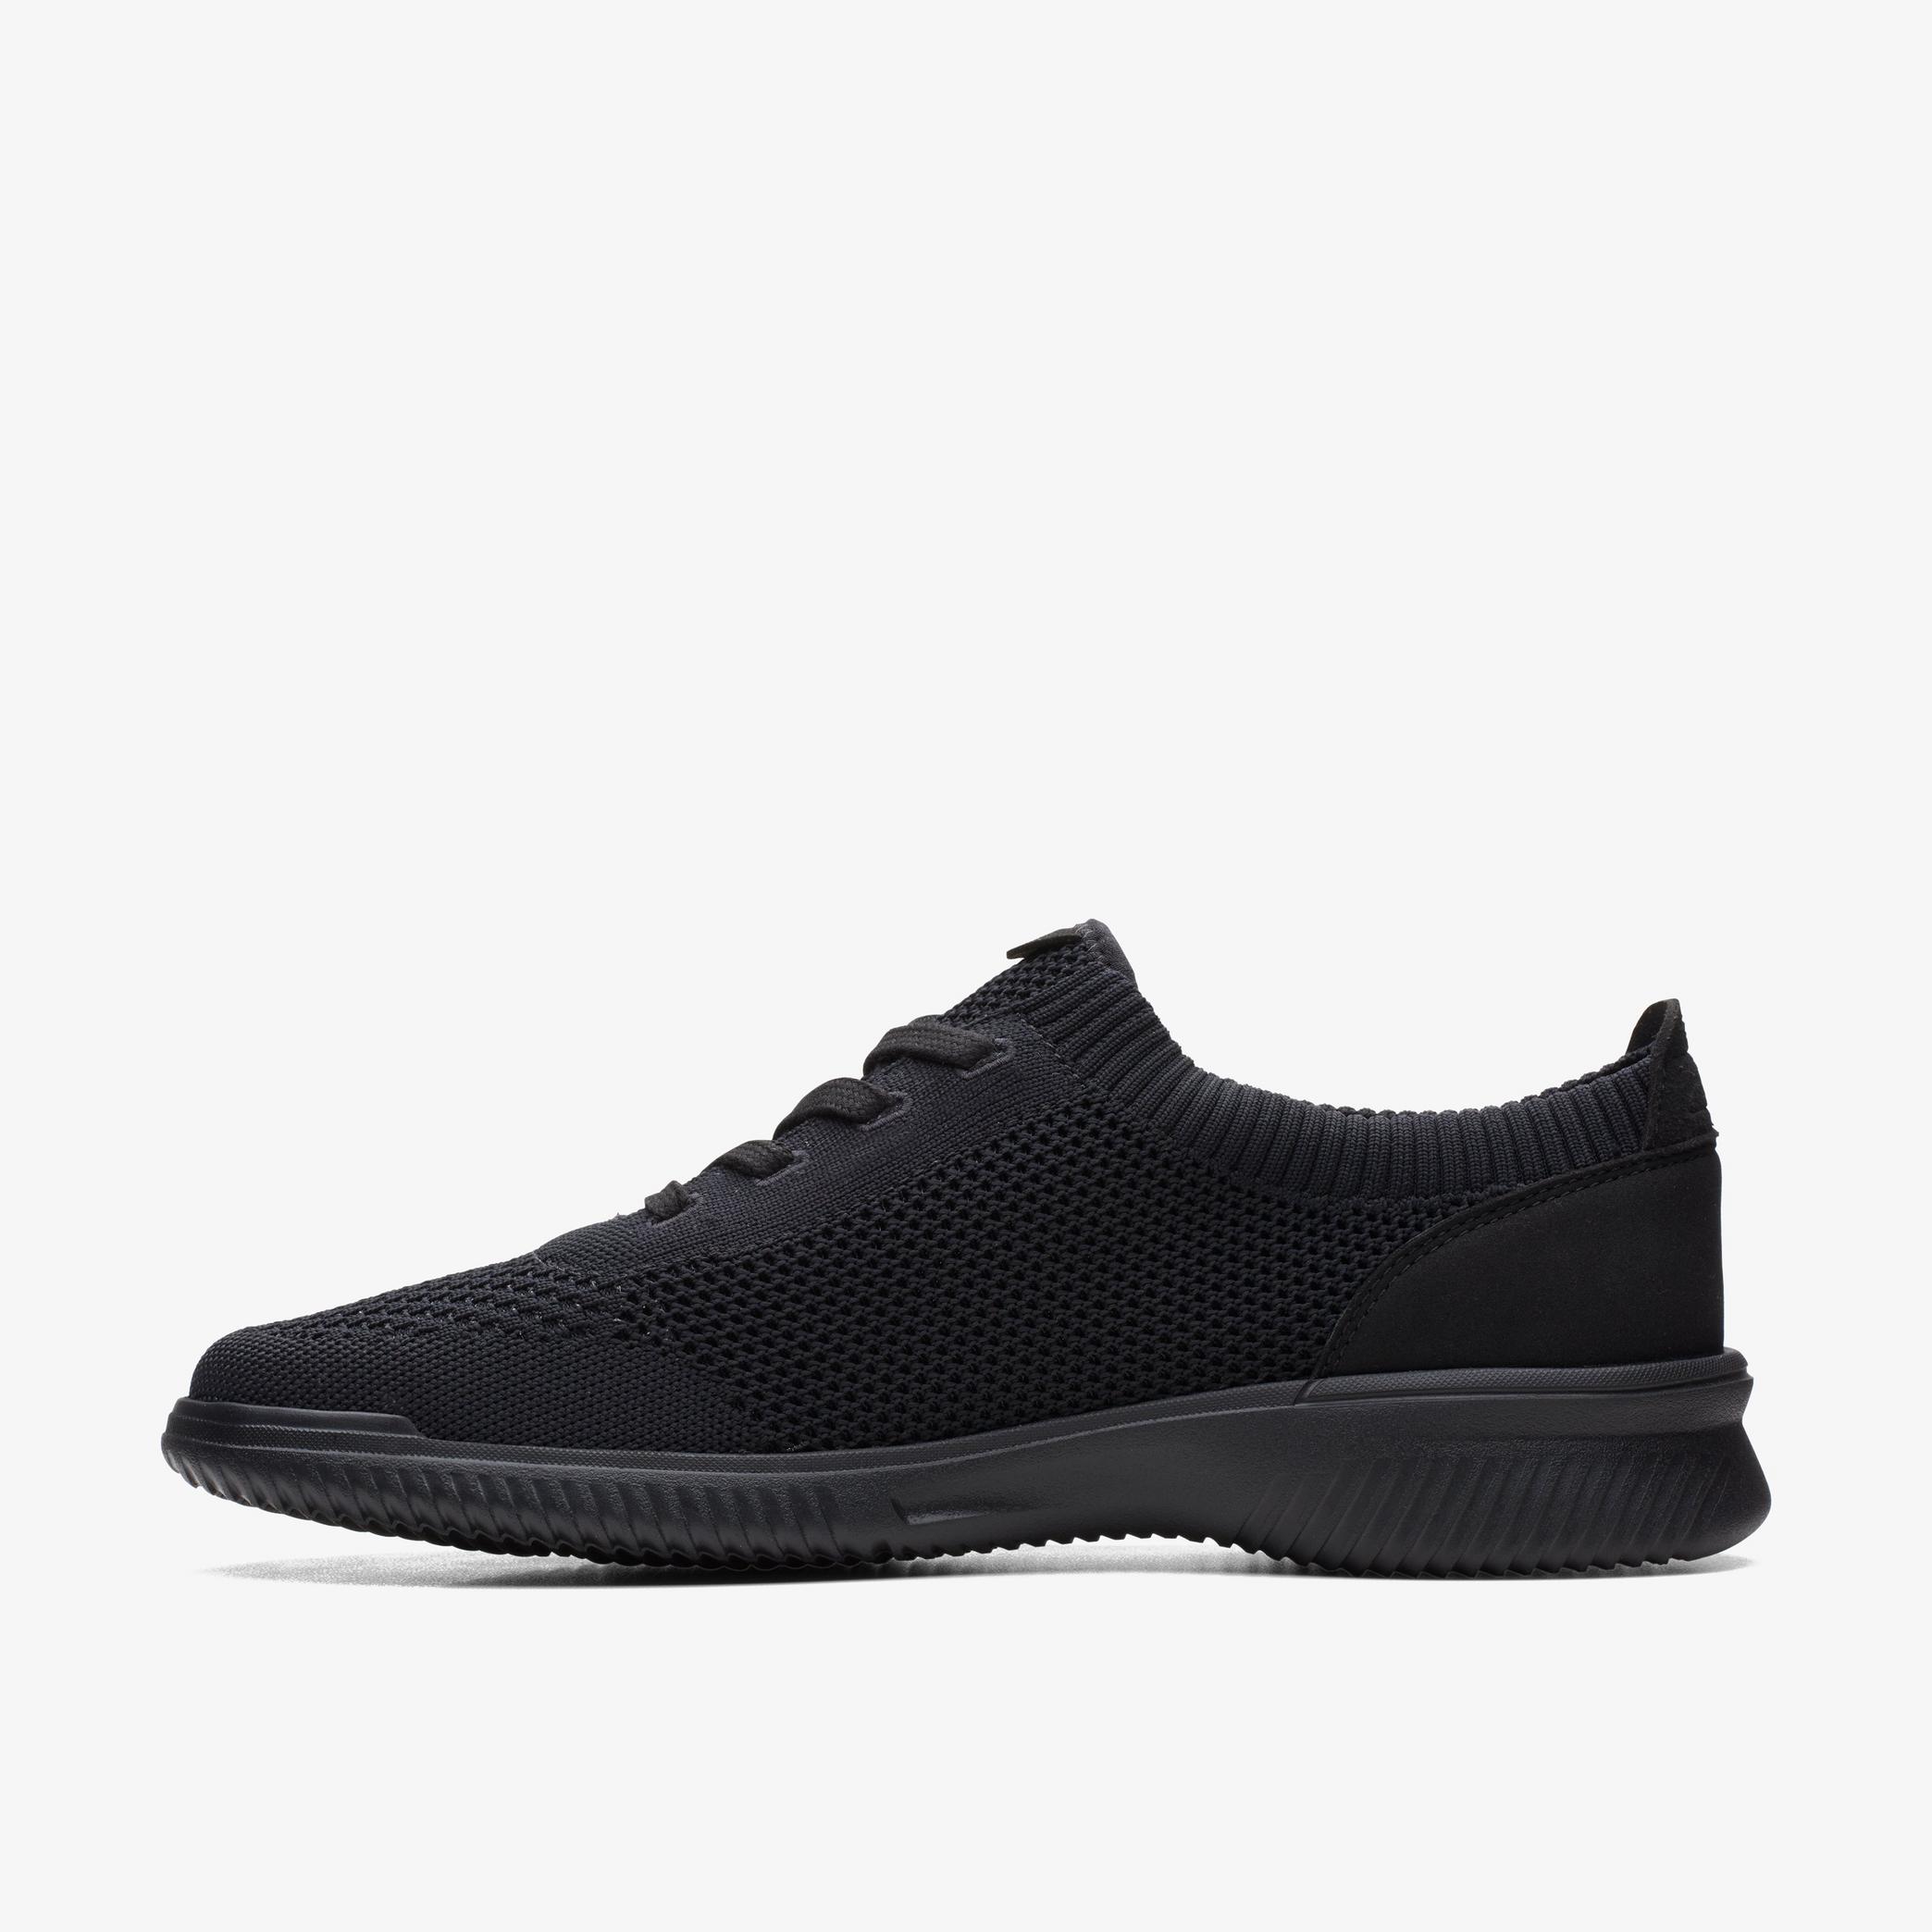 Donaway Knit Black/Black Trainers, view 2 of 6